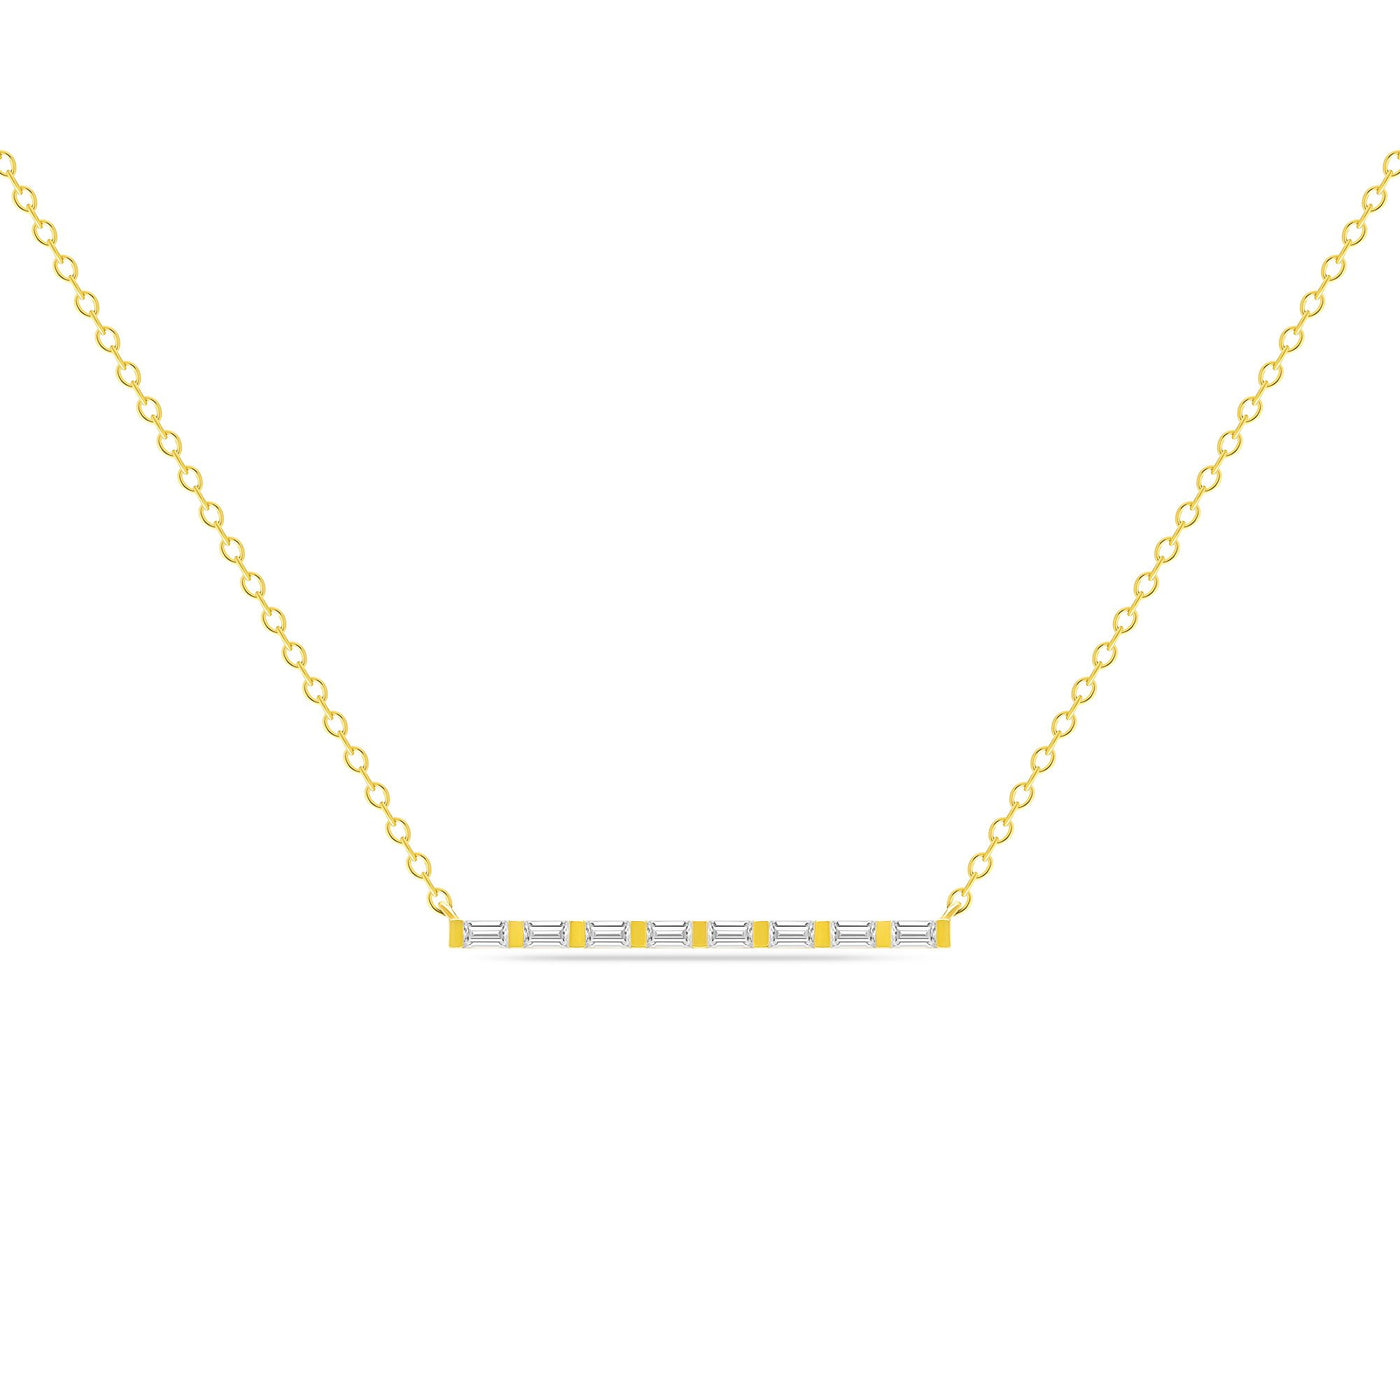 14K Solid Gold All Baguette Diamond Tension Bar Necklace